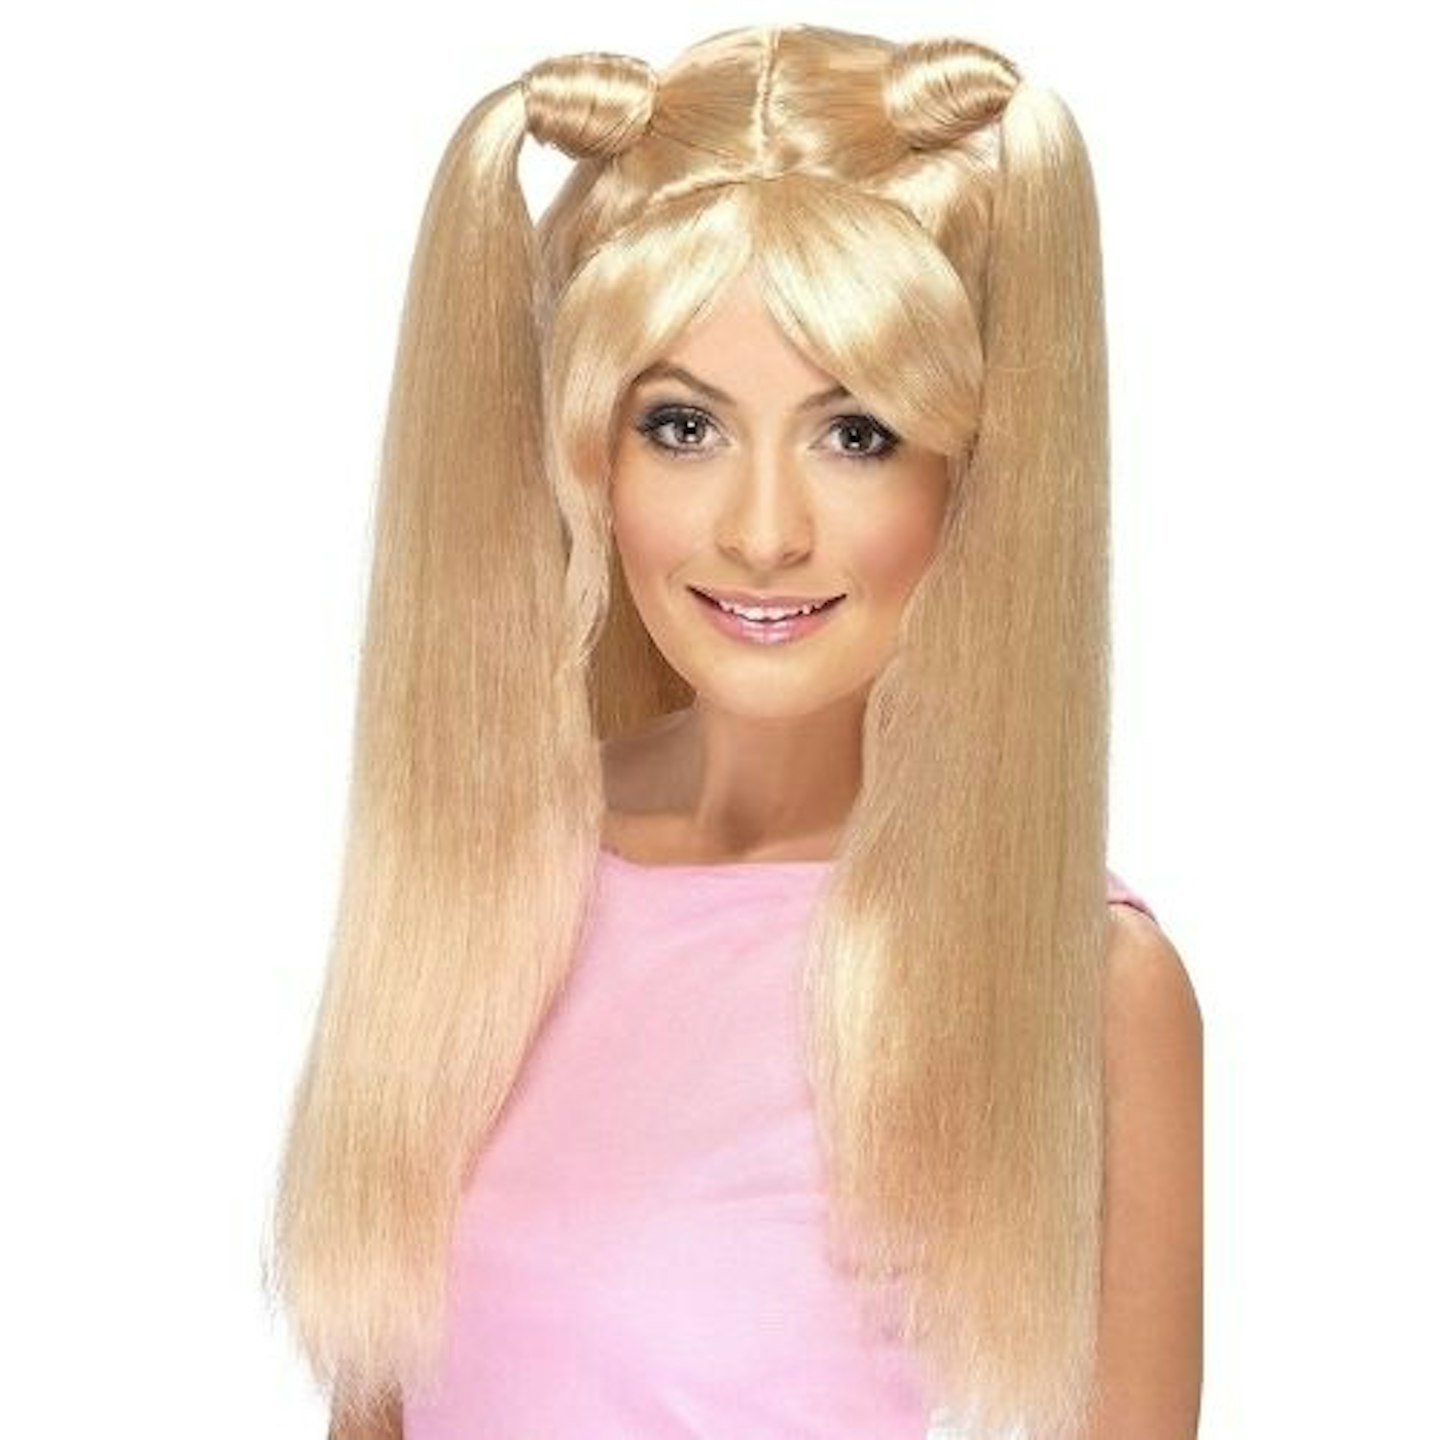 Smiffys Baby Power Blonde Wig with Pony Tails